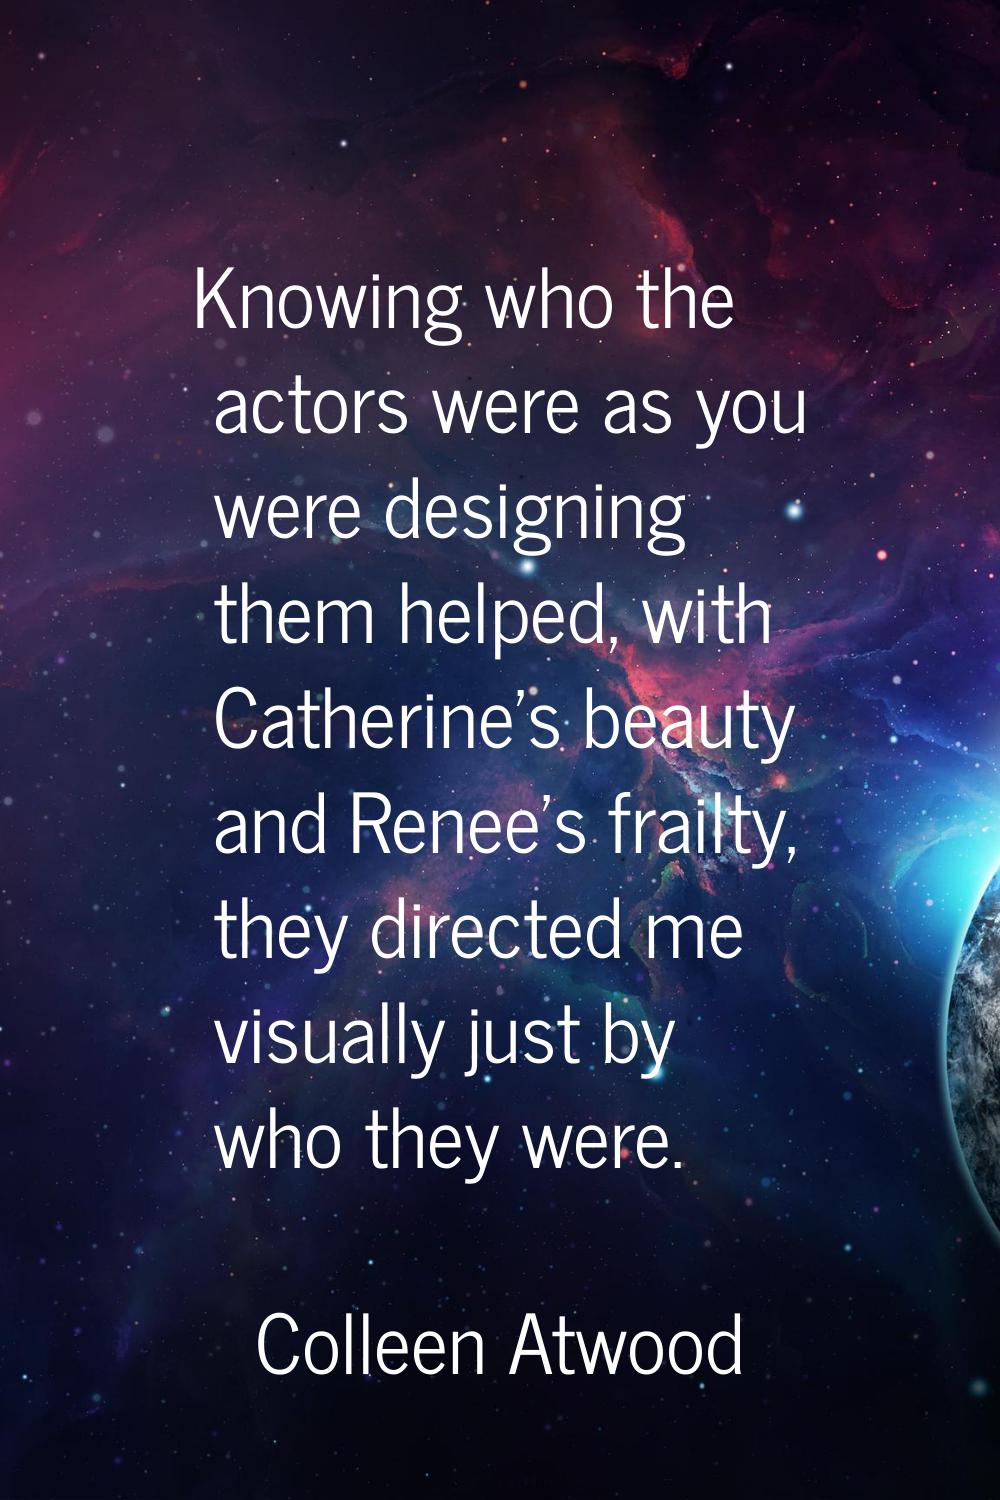 Knowing who the actors were as you were designing them helped, with Catherine's beauty and Renee's 